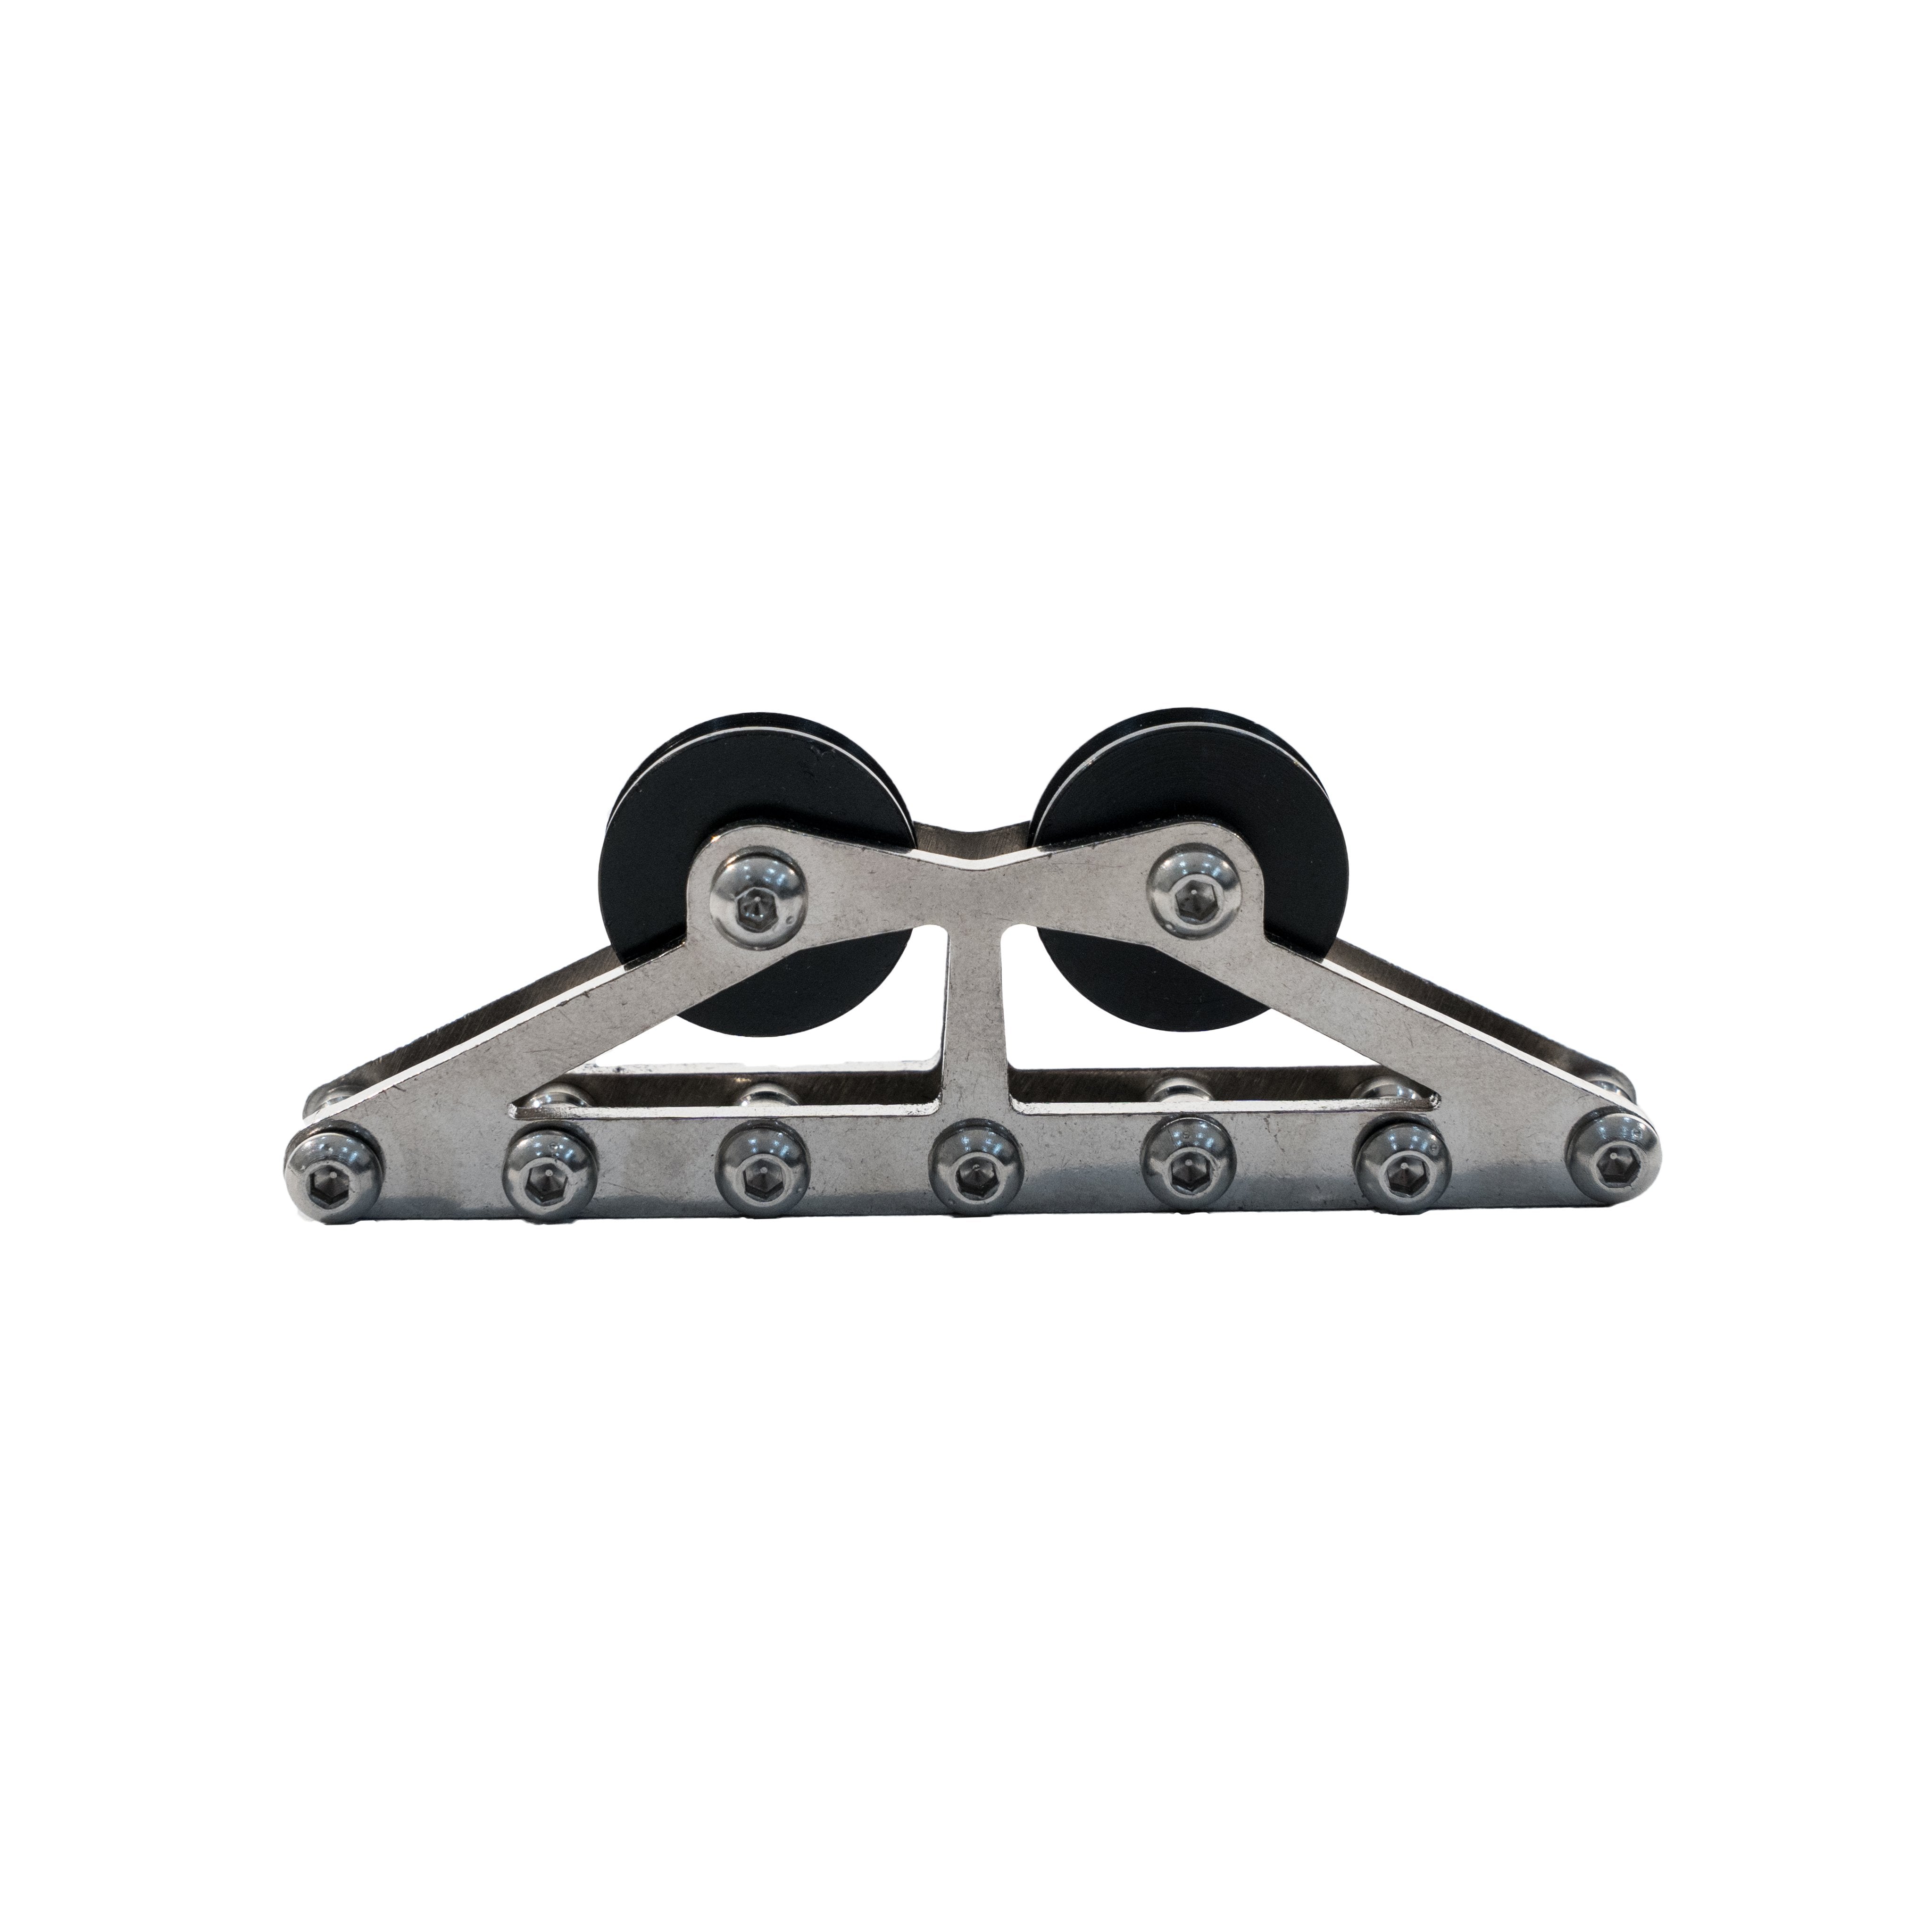 Stainless Steel Pulley - Double